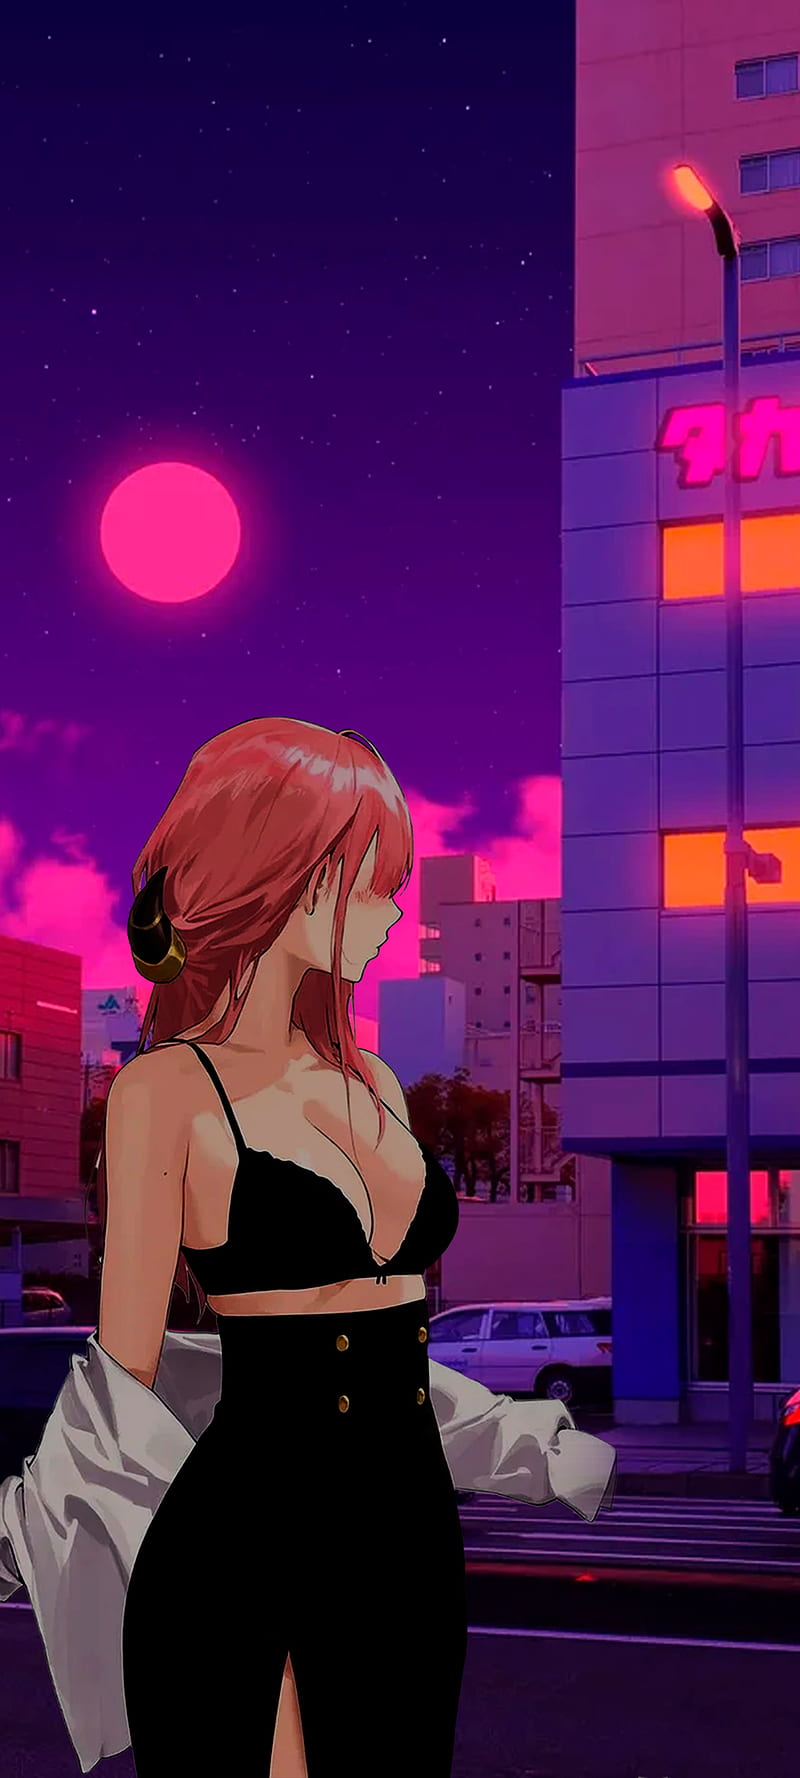 Vaporwave anime girl, sky, magenta, pink, anime girl, sexy, android, iOS,  iphone, HD phone wallpaper | Peakpx